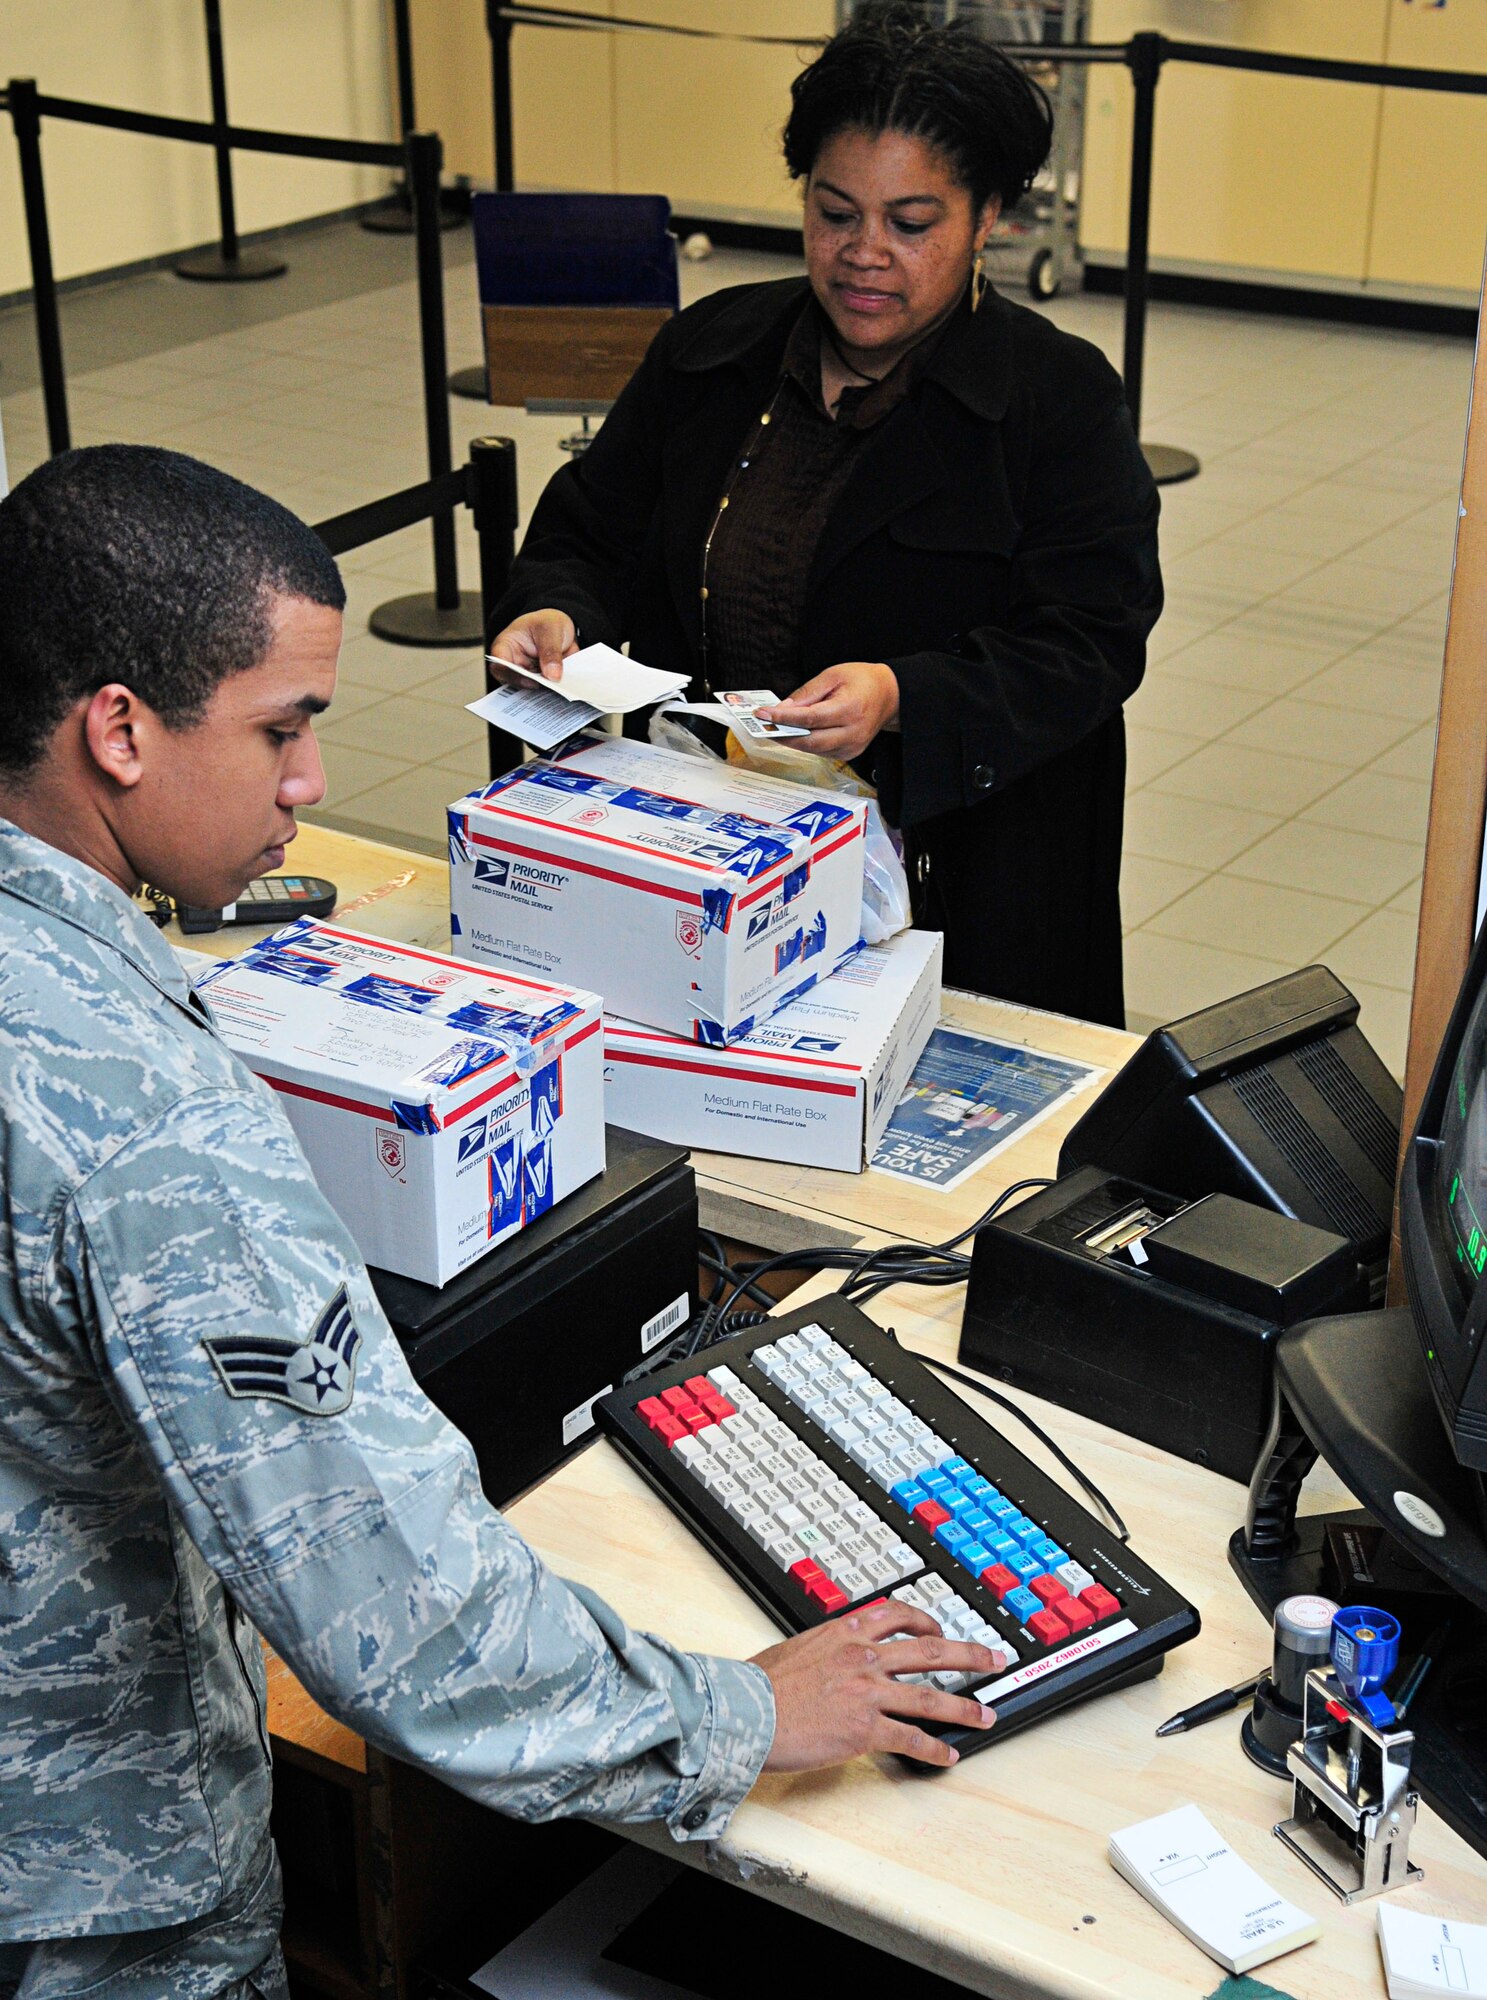 U.S. Air Force Senior Airman Oluchi Garnica, 86th Communications Squadron postal clerk, assists a customer mailing a parcel at the Northside Post Office, Ramstein Air Base, Germany, Feb. 17, 2011. Parcel pick-up is Monday through Friday 10 a.m. - 5:30 p.m., Saturday 10 a.m. – 1 p.m. and closed on Sunday. (U.S. Air Force photo by Airman 1st Class Desiree Esposito)